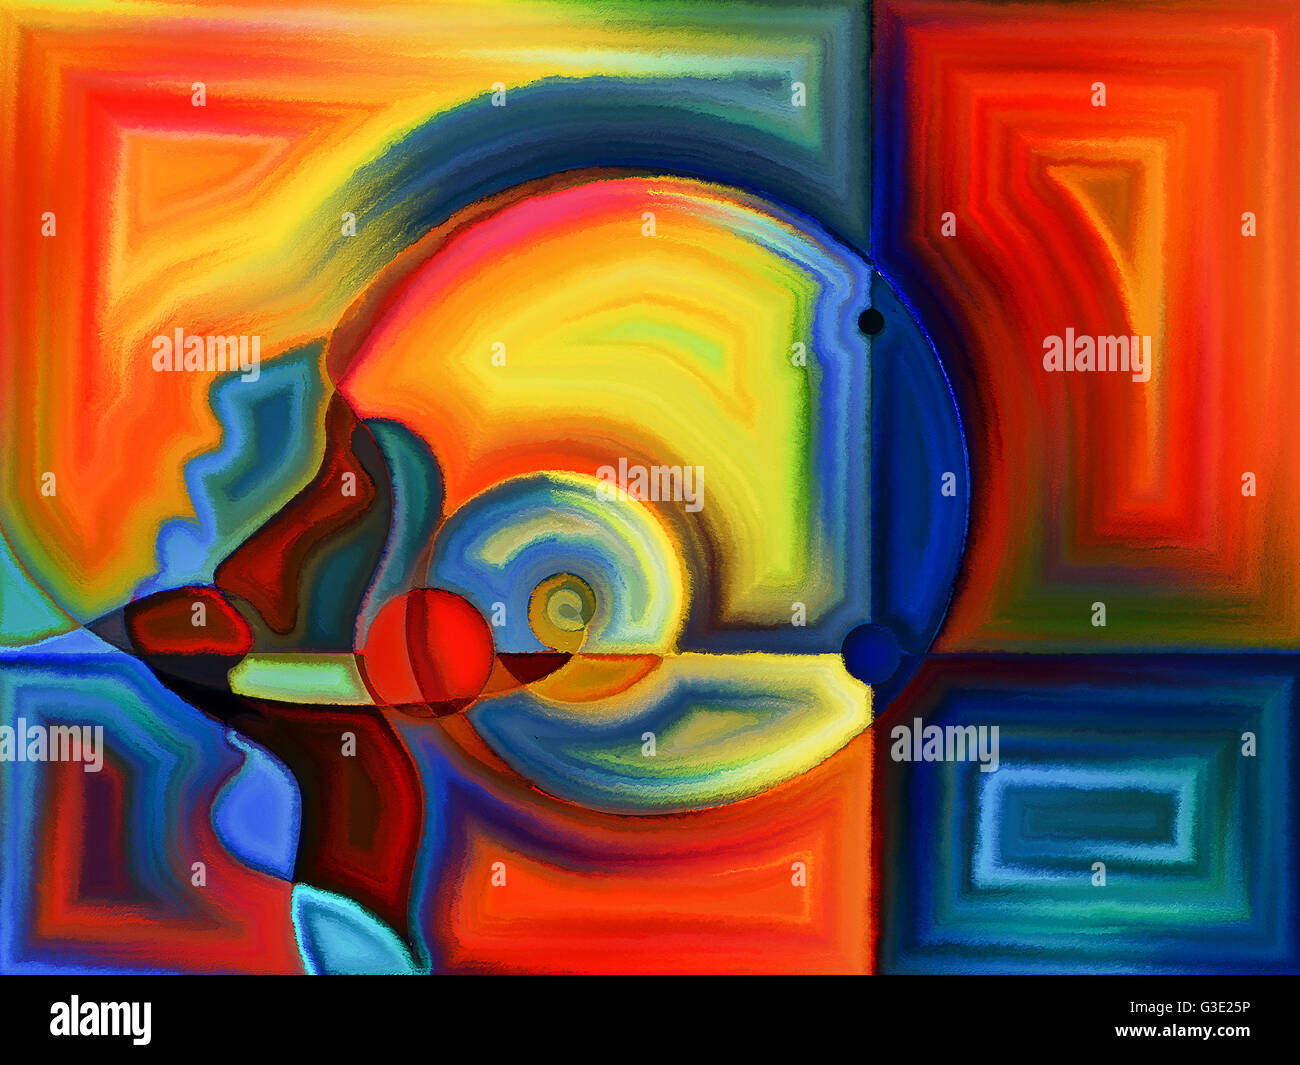 Thinking Divided series. Abstract design made of human profiles and stained glass lines on the subject of mind, science, technol Stock Photo